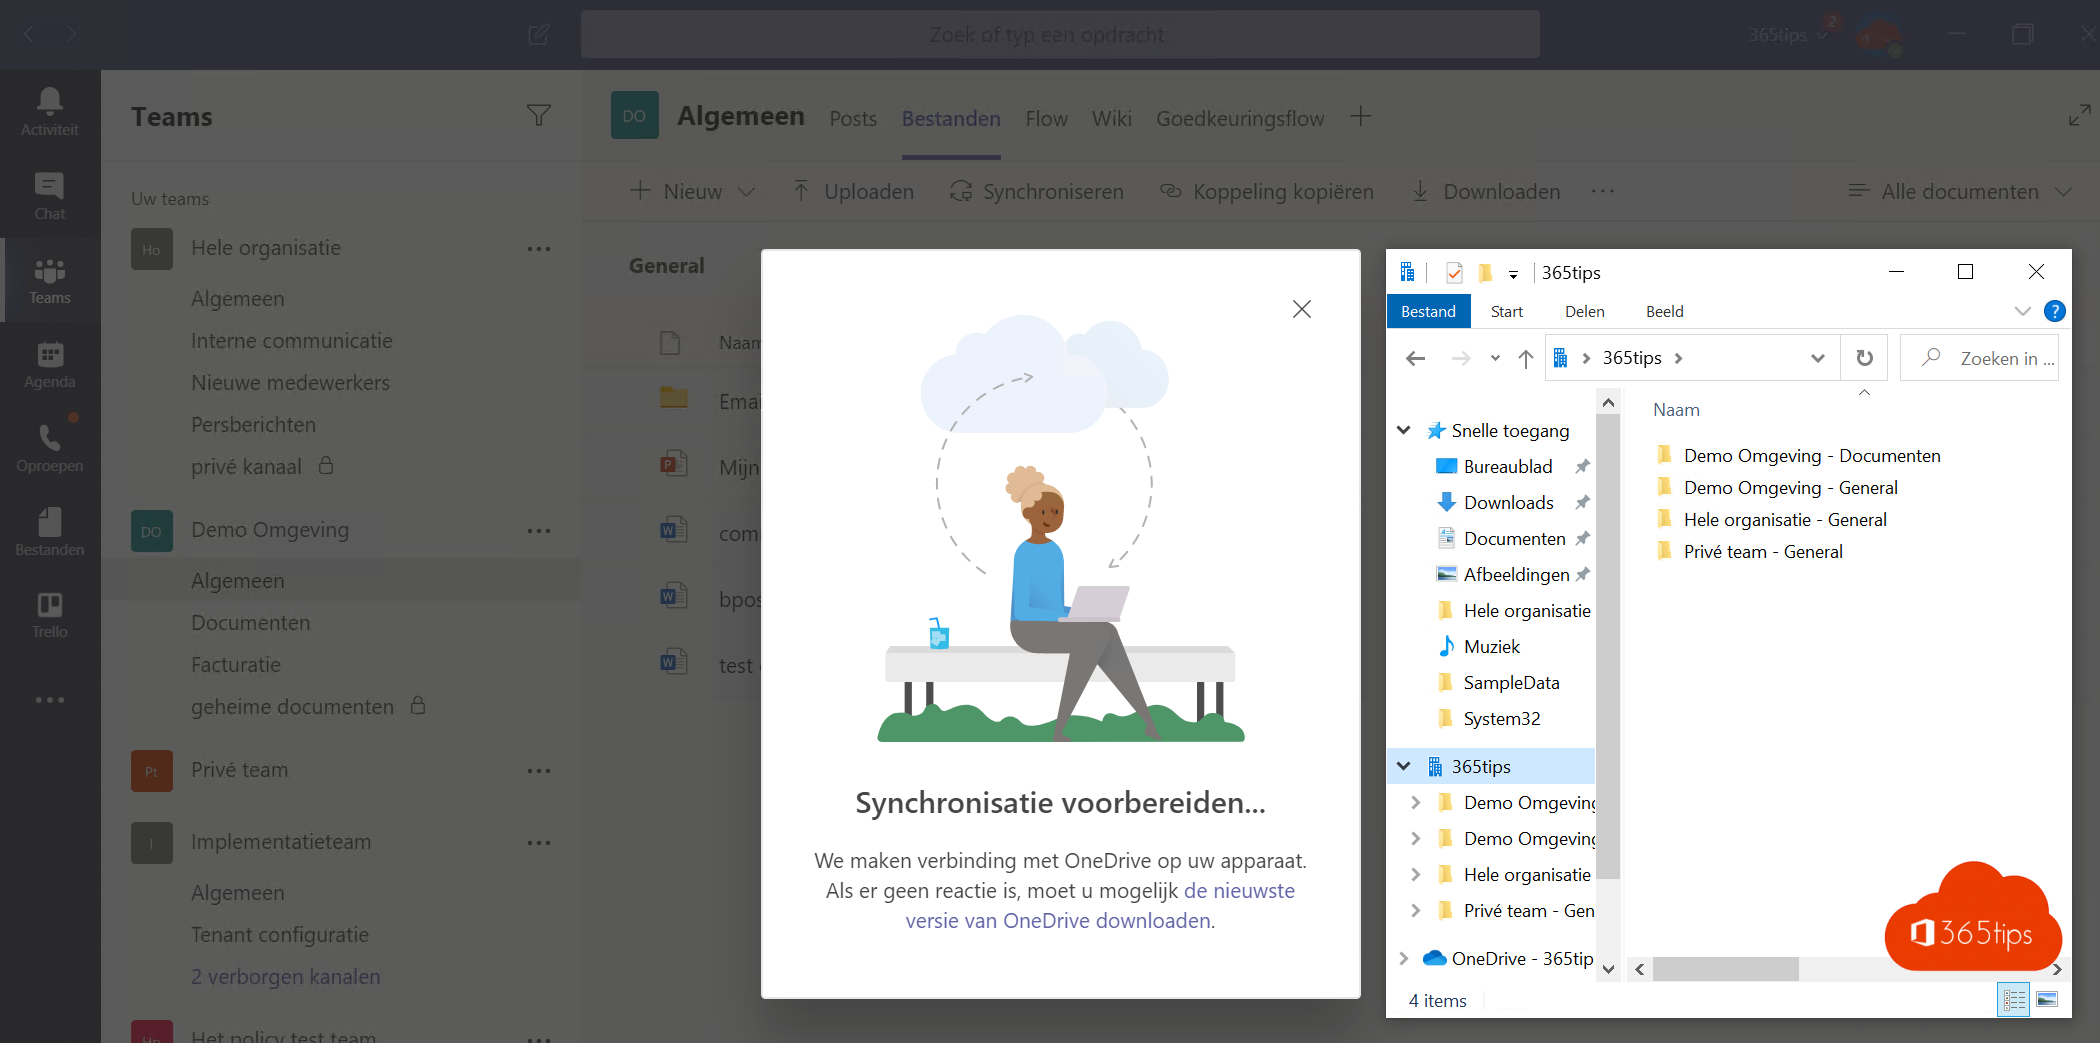 🖥️ How to synchronize Microsoft teams files with windows explorer?